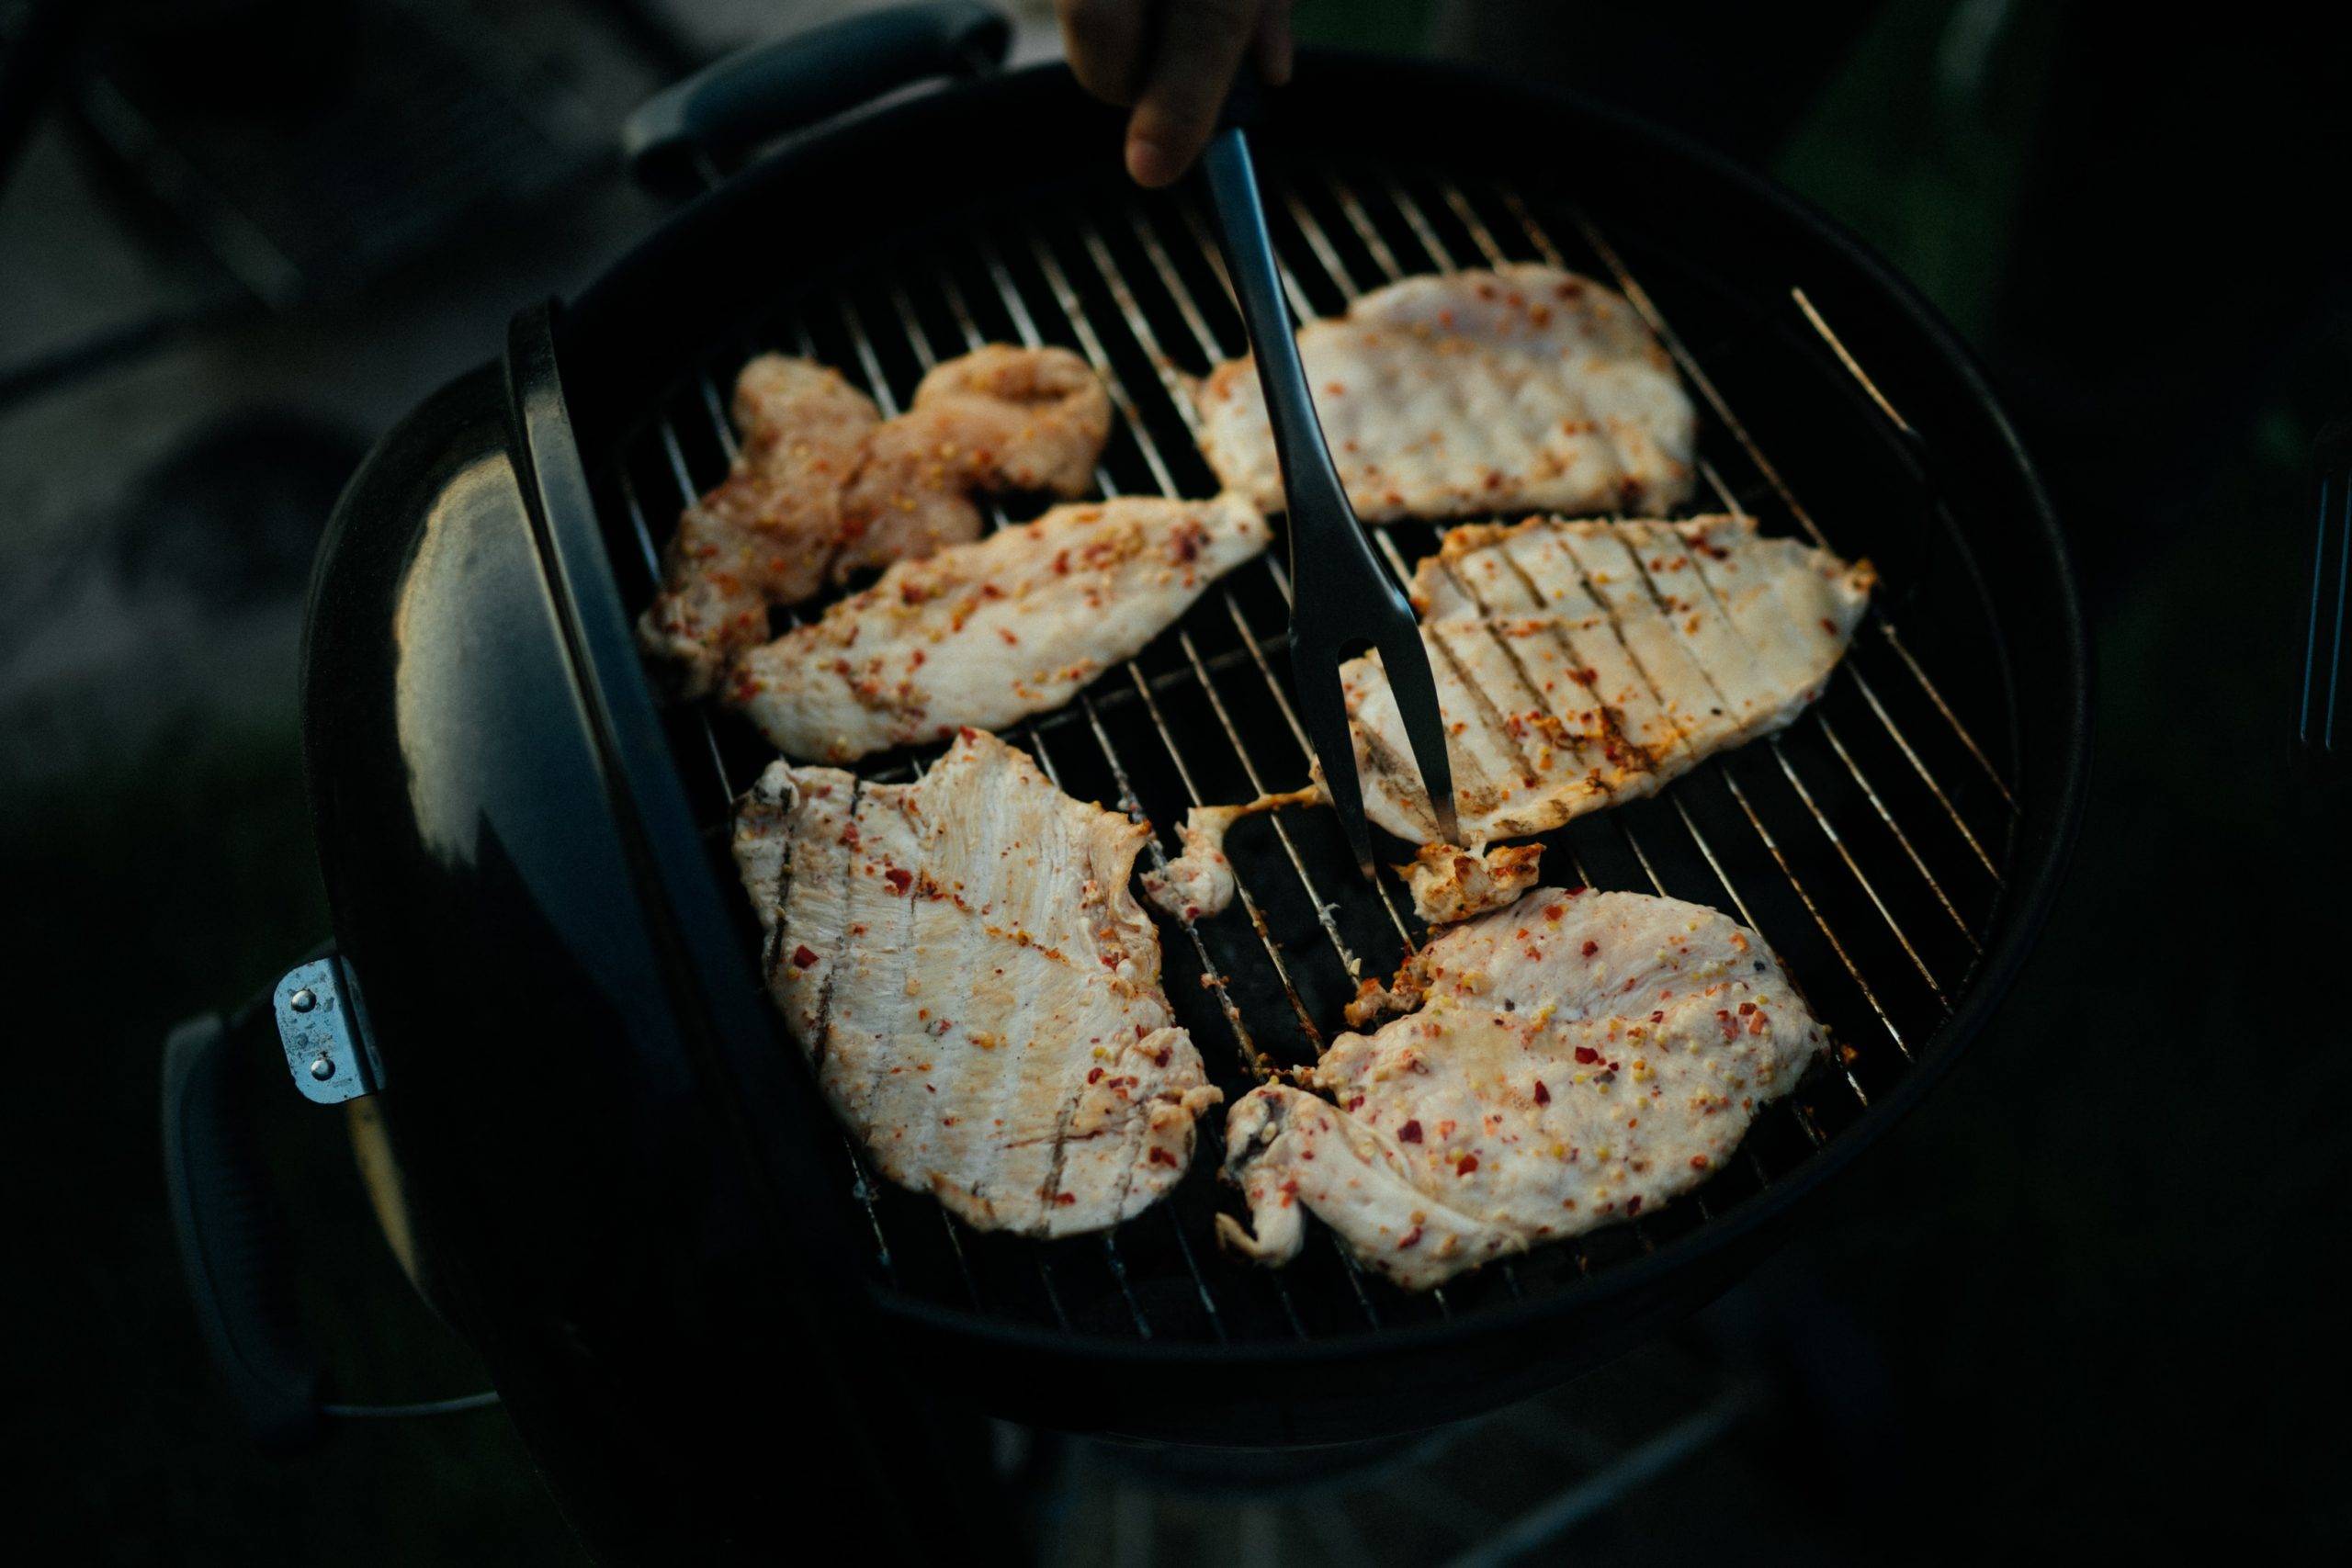 Chicken being cooked on a BBQ